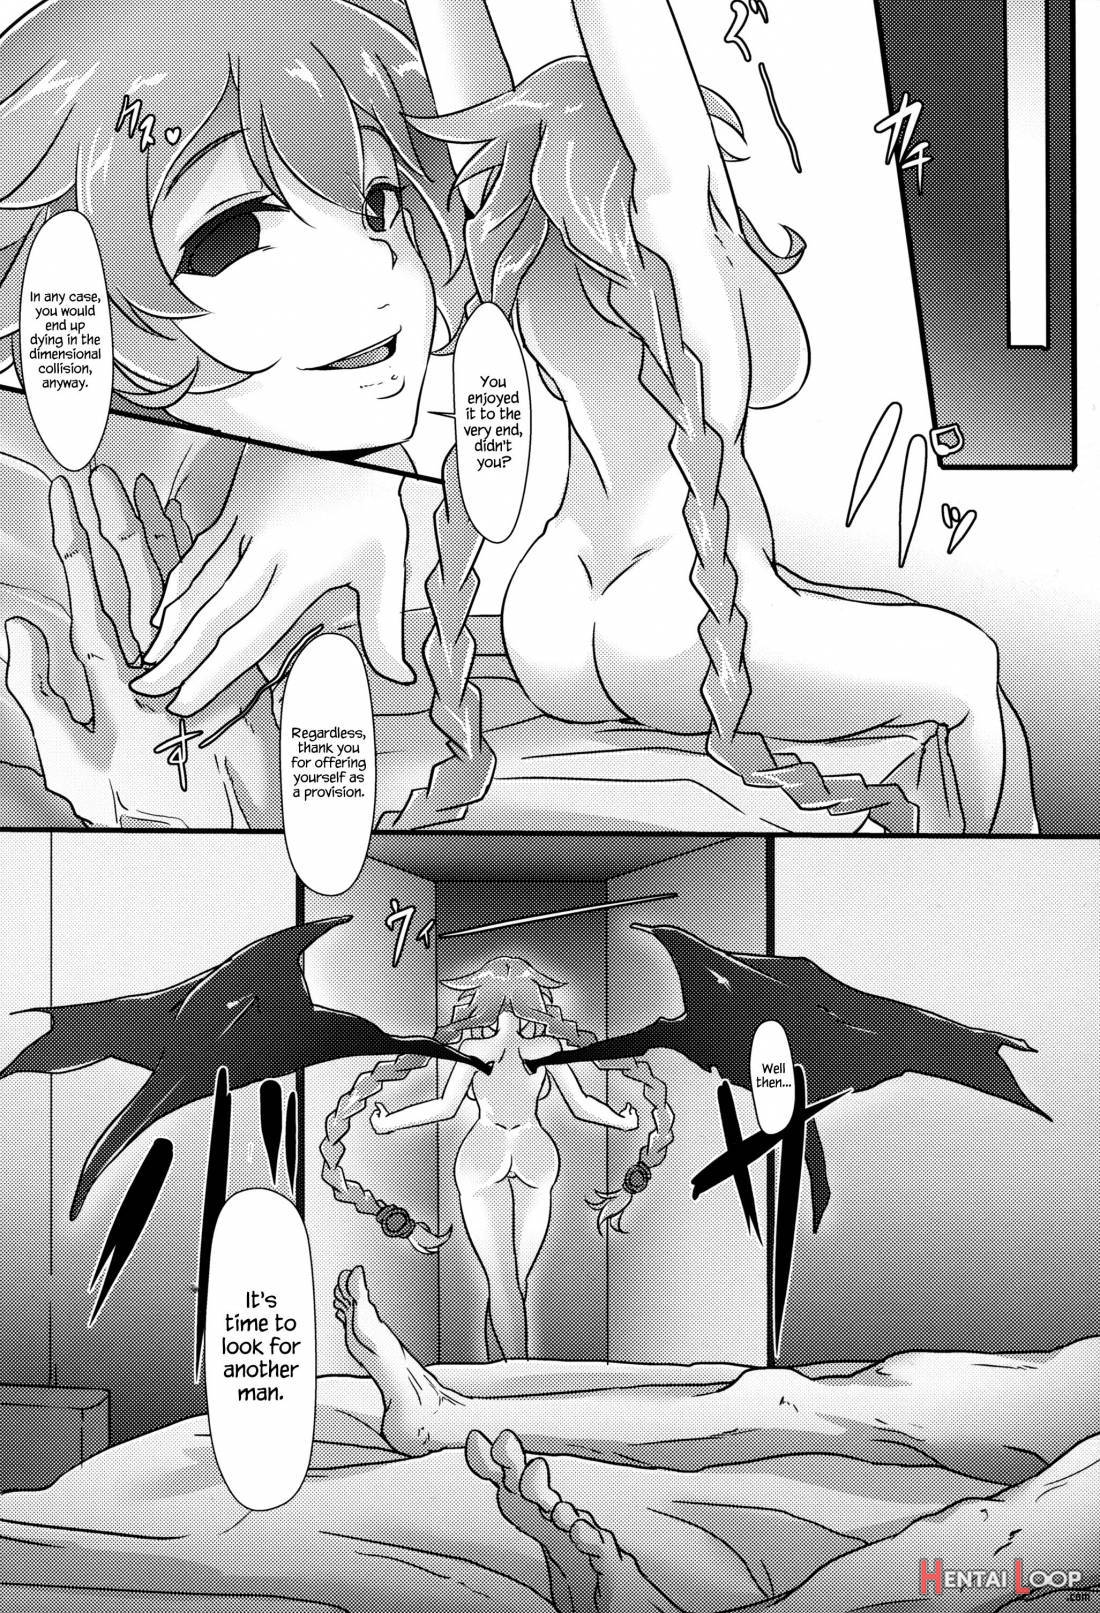 Nightmare from goddess page 27